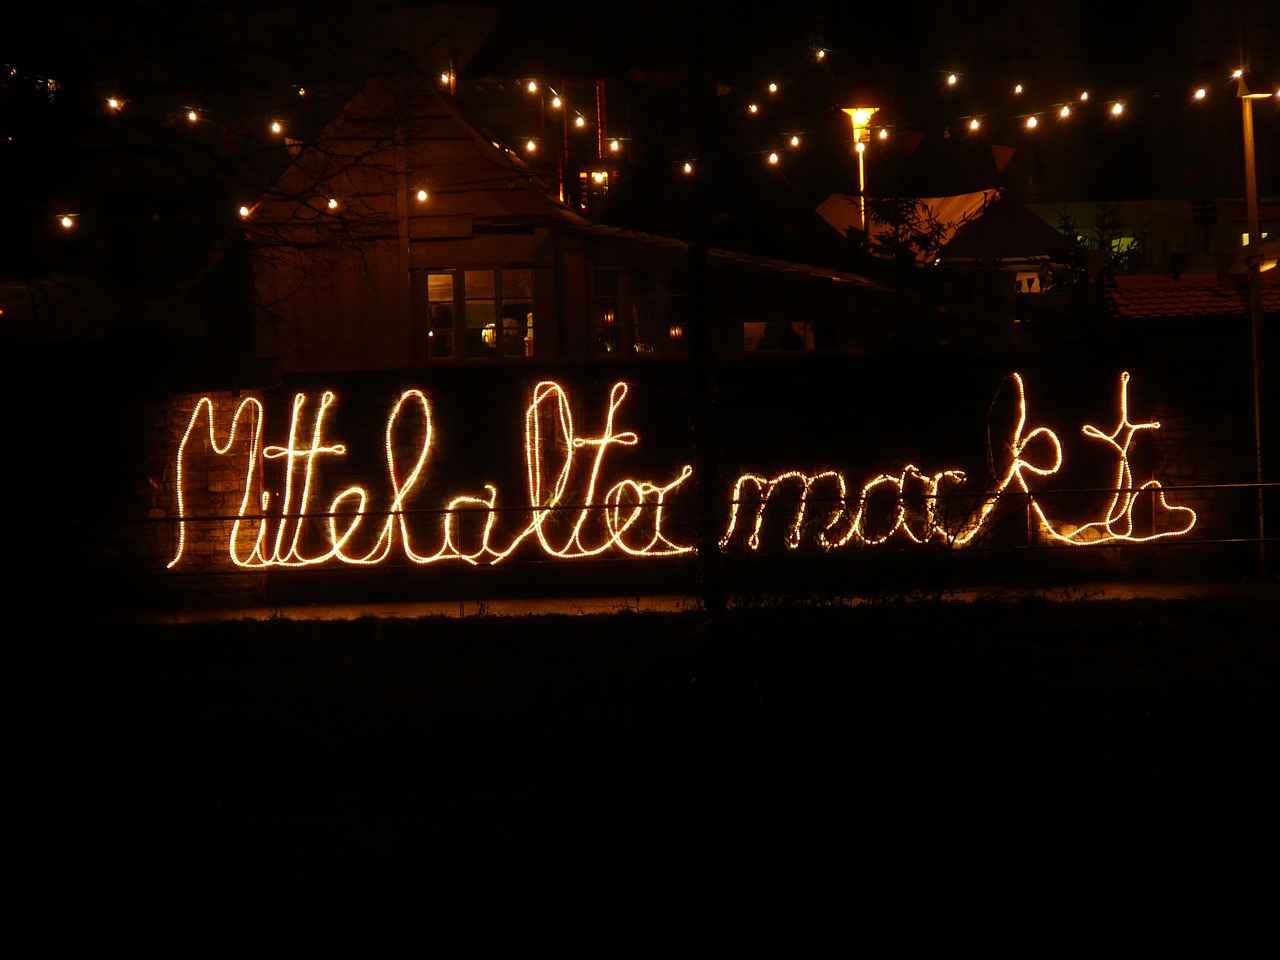 lichterkette,lettering,lighting,light,medieval market,darkness,free pictures, free photos, free images, royalty free, free illustrations, public domain